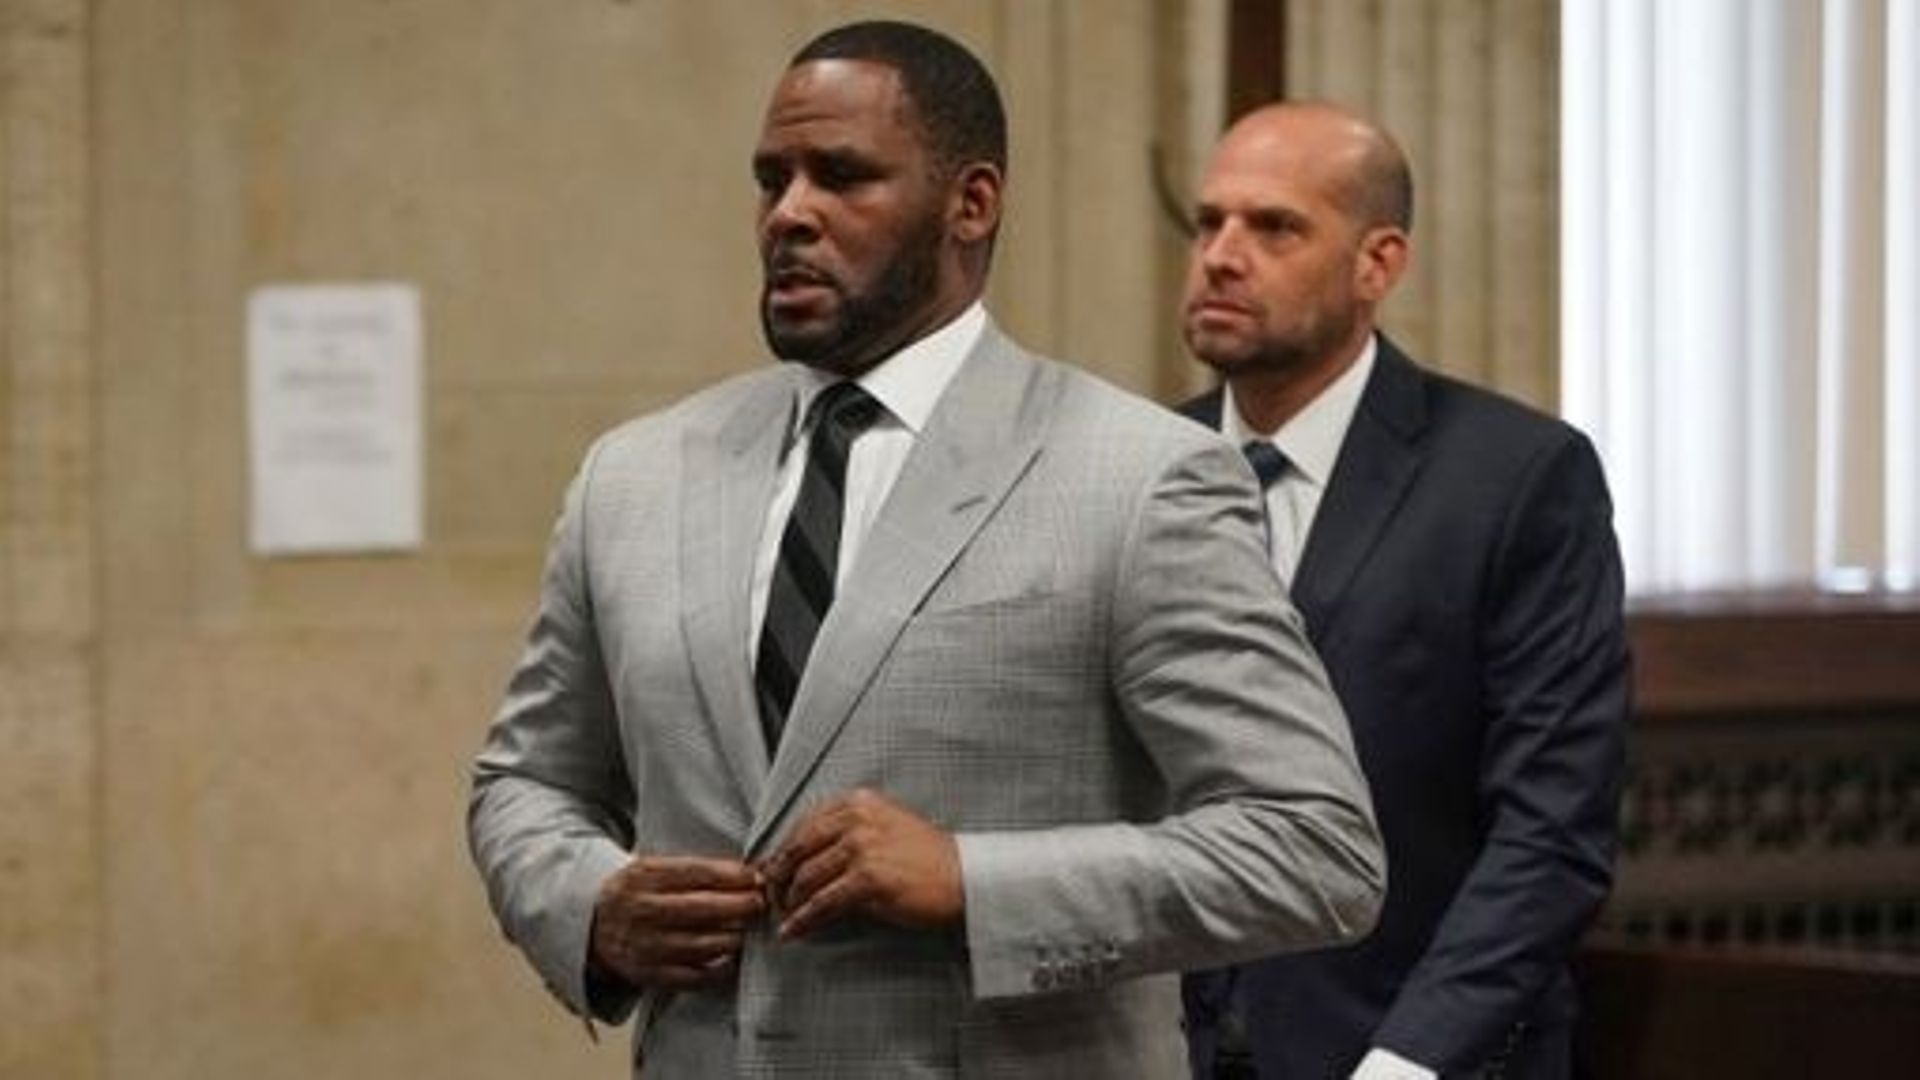 (FILES) In this file photo taken on June 06, 2019 R. Kelly pleads not guilty to a new indictment before Judge Lawrence Flood at Leighton Criminal Court Building in Chicago.  A US judge on February 23, 2023 sentenced the disgraced R&B singer R. Kelly to a 